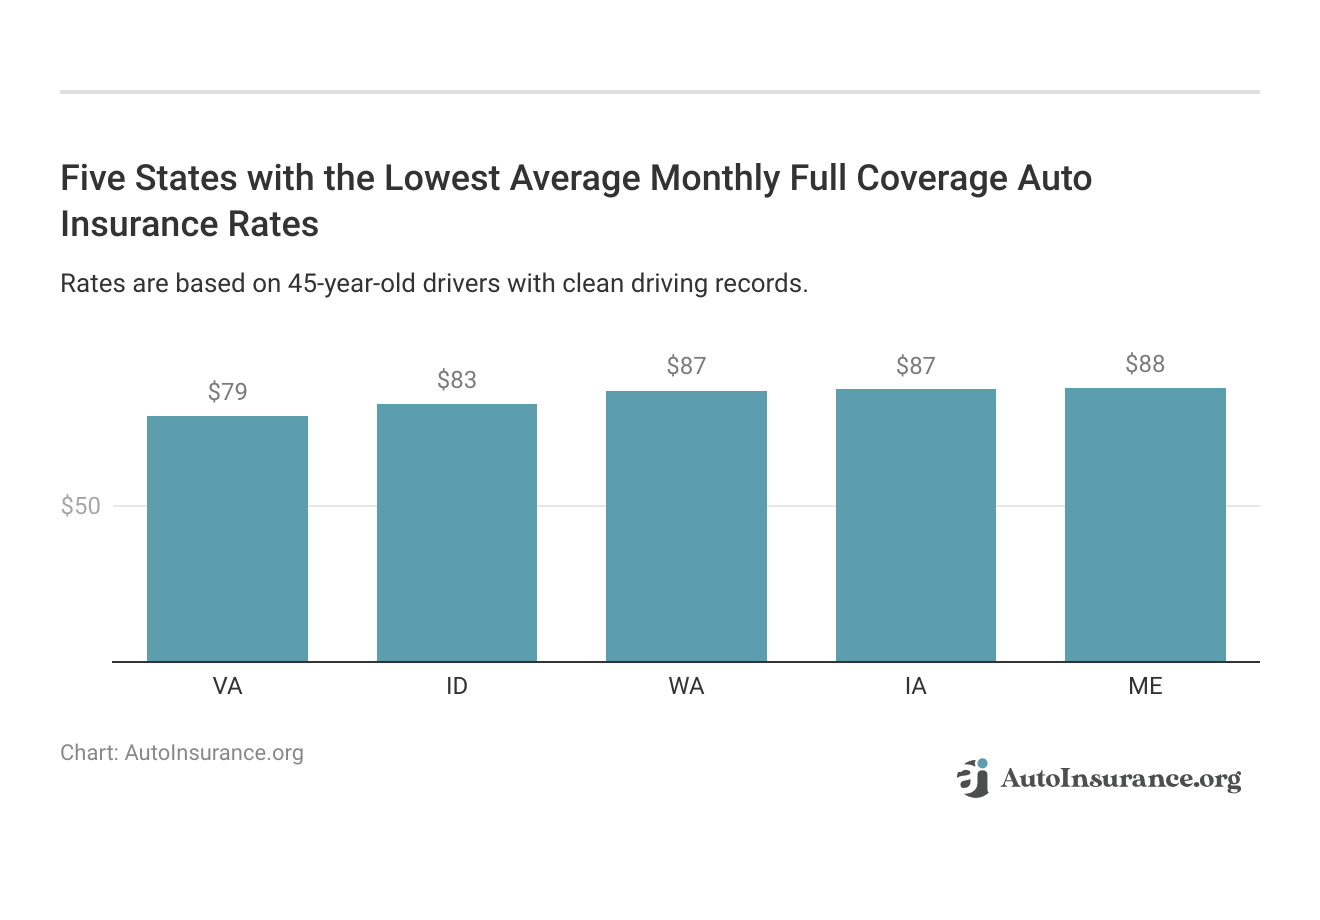 <h3>Five States with the Lowest Average Monthly Full Coverage Auto Insurance Rates</h3>